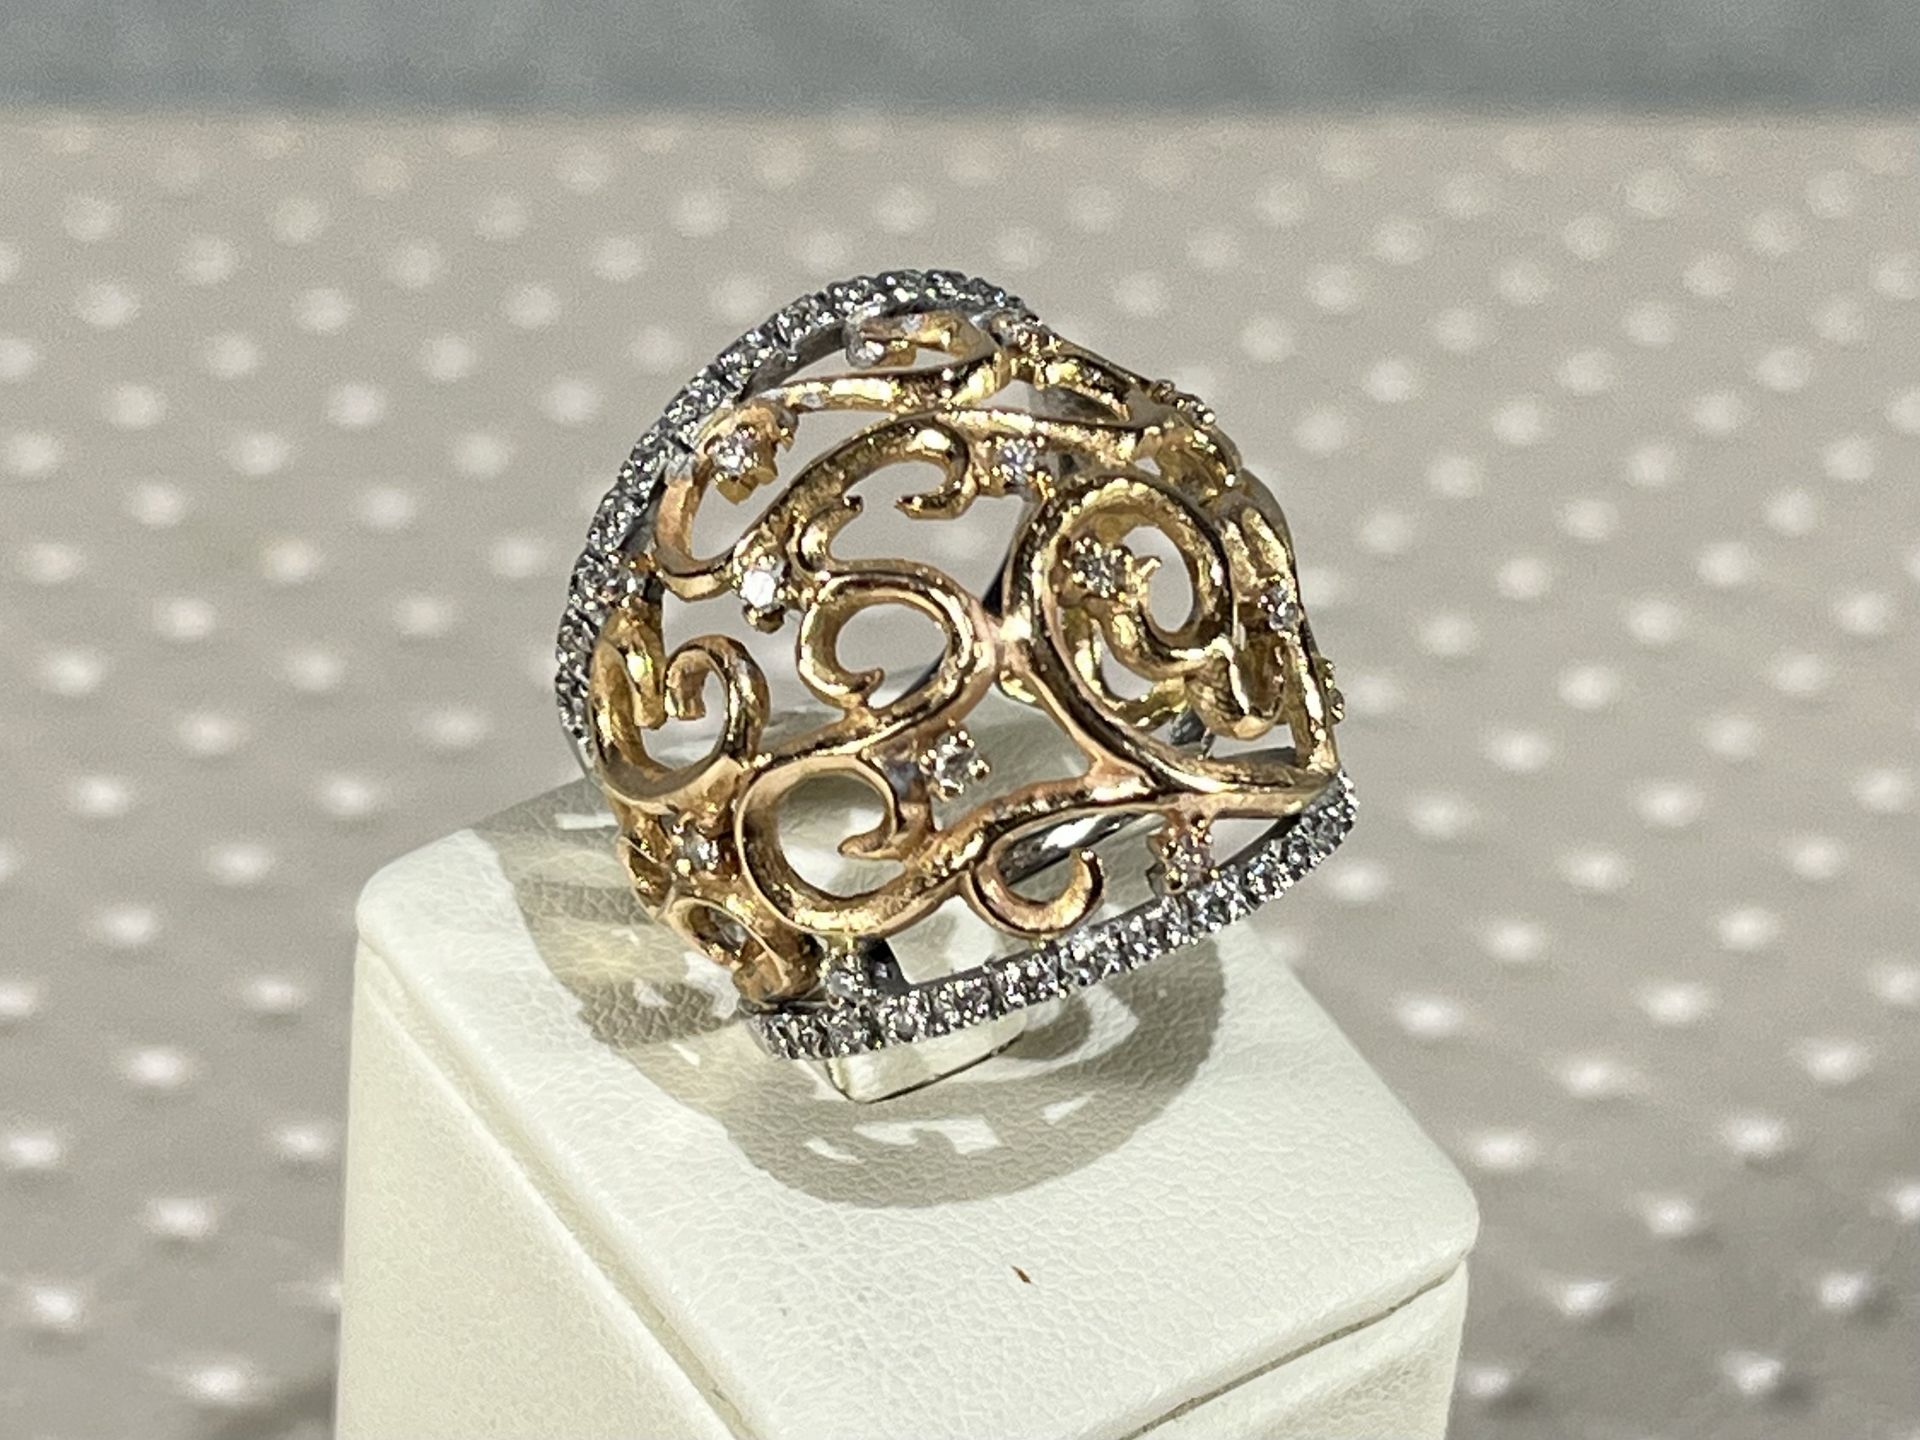 18k white and rose GOLD ring - Brilliant cut diamonds 0.60 ct - Weight: 11.7 gr